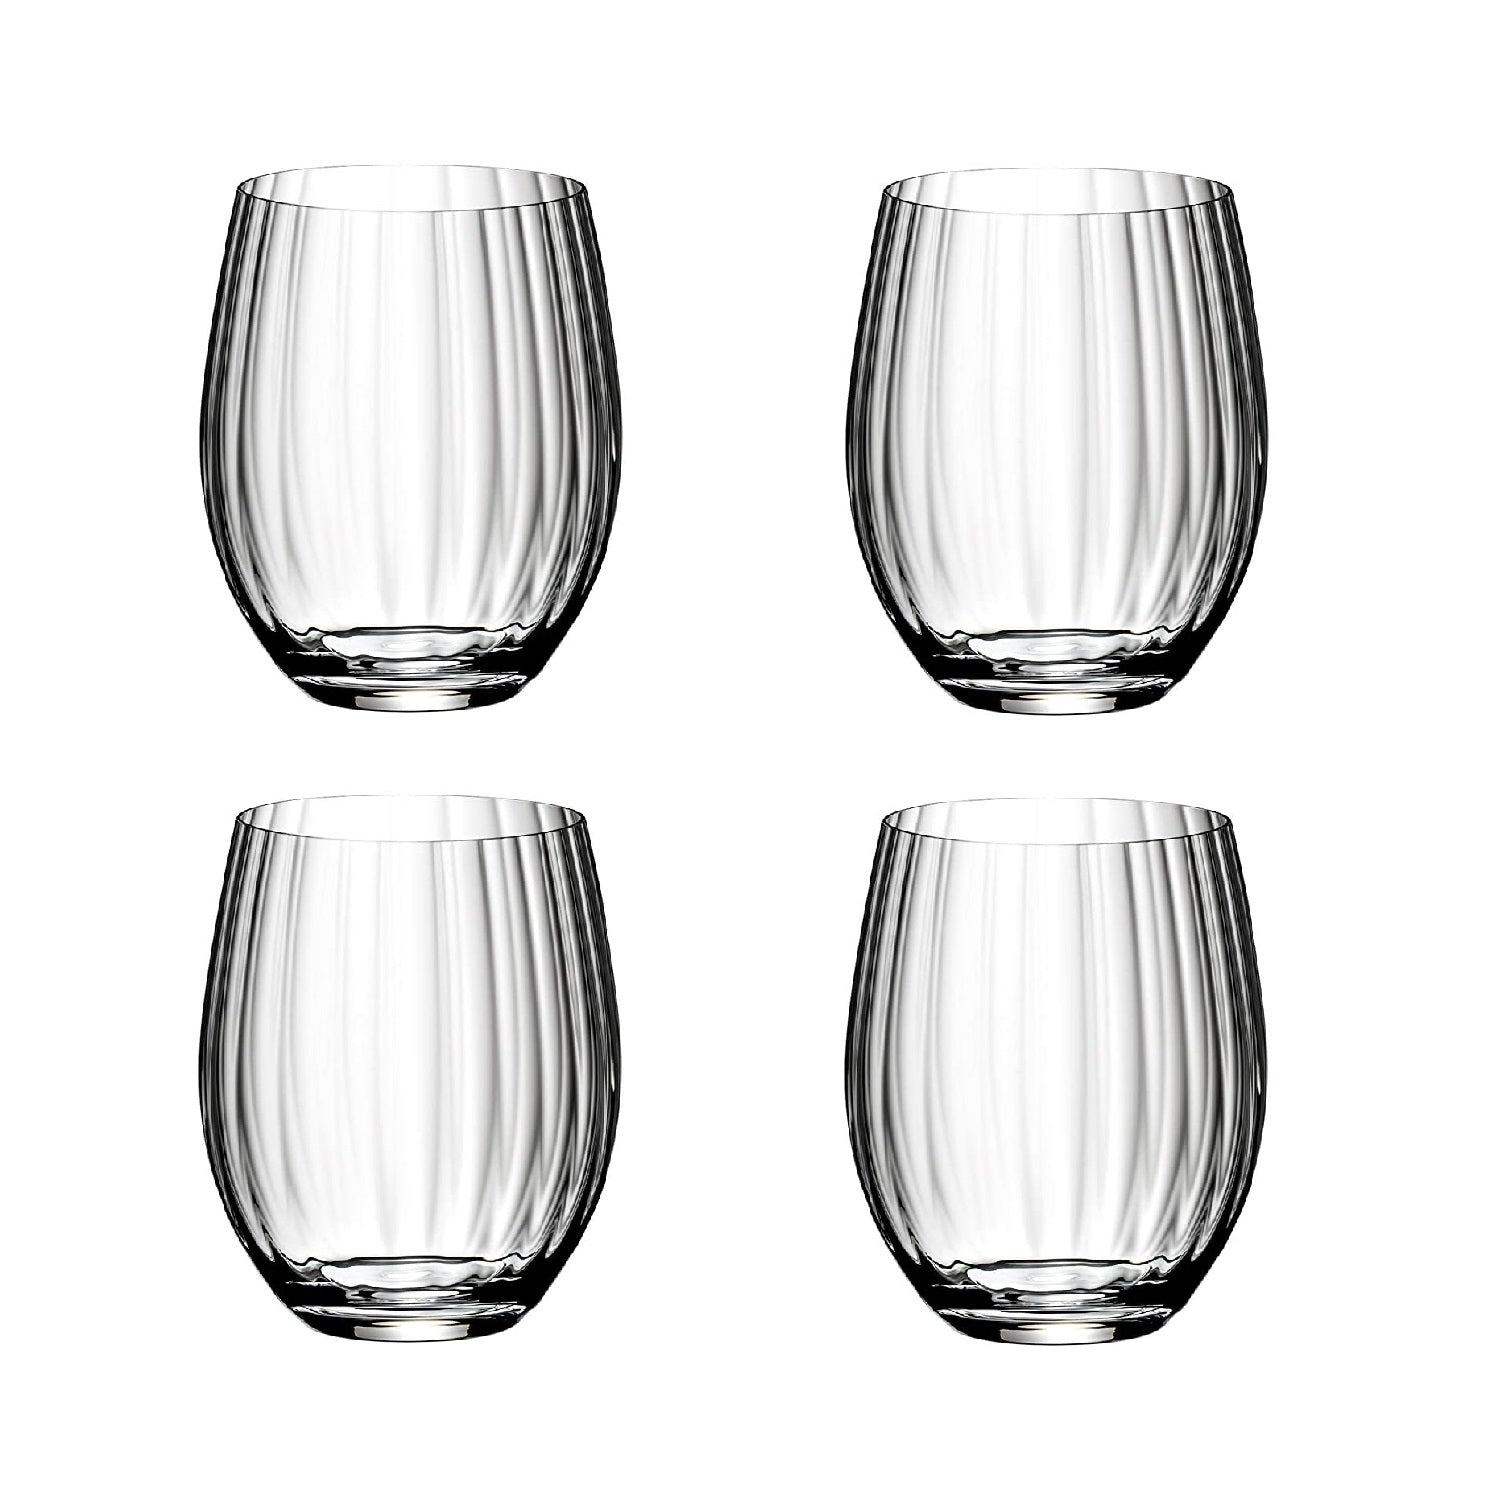 Riedel Mixing Tonic Set, Set of 4 Cocktail Glasses